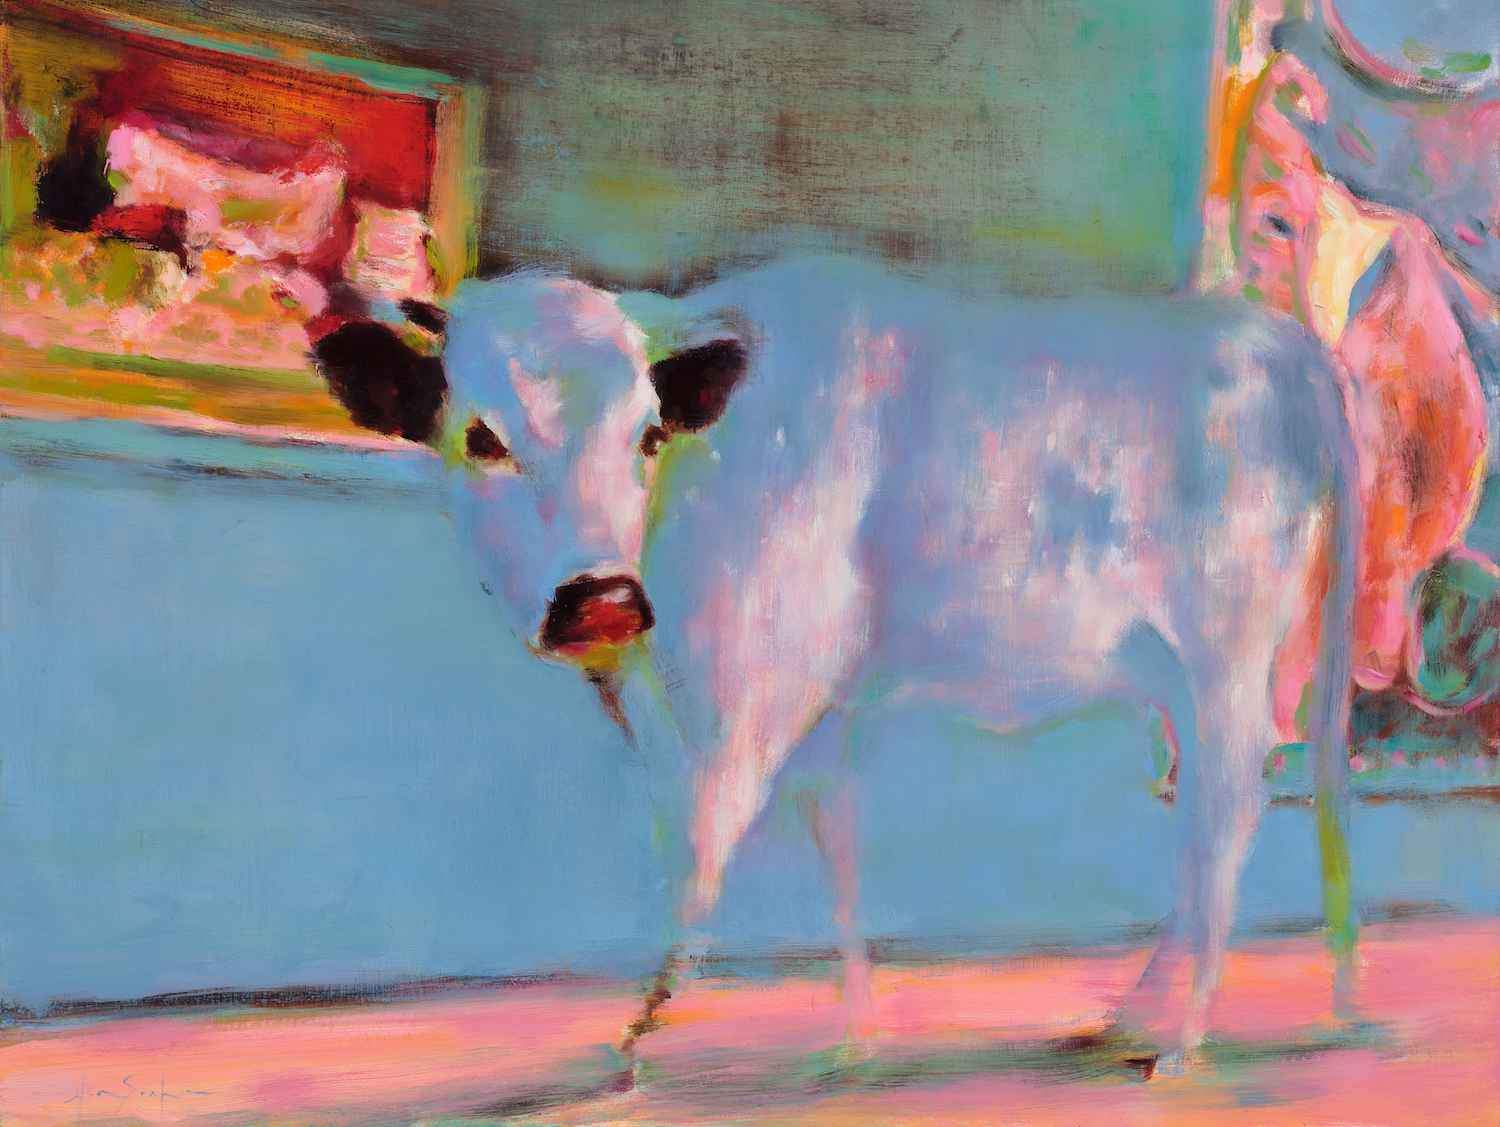 Cow walking in a museum or Gallery.  Whimsical Cows in unexpected places.  Elsa Sroka.